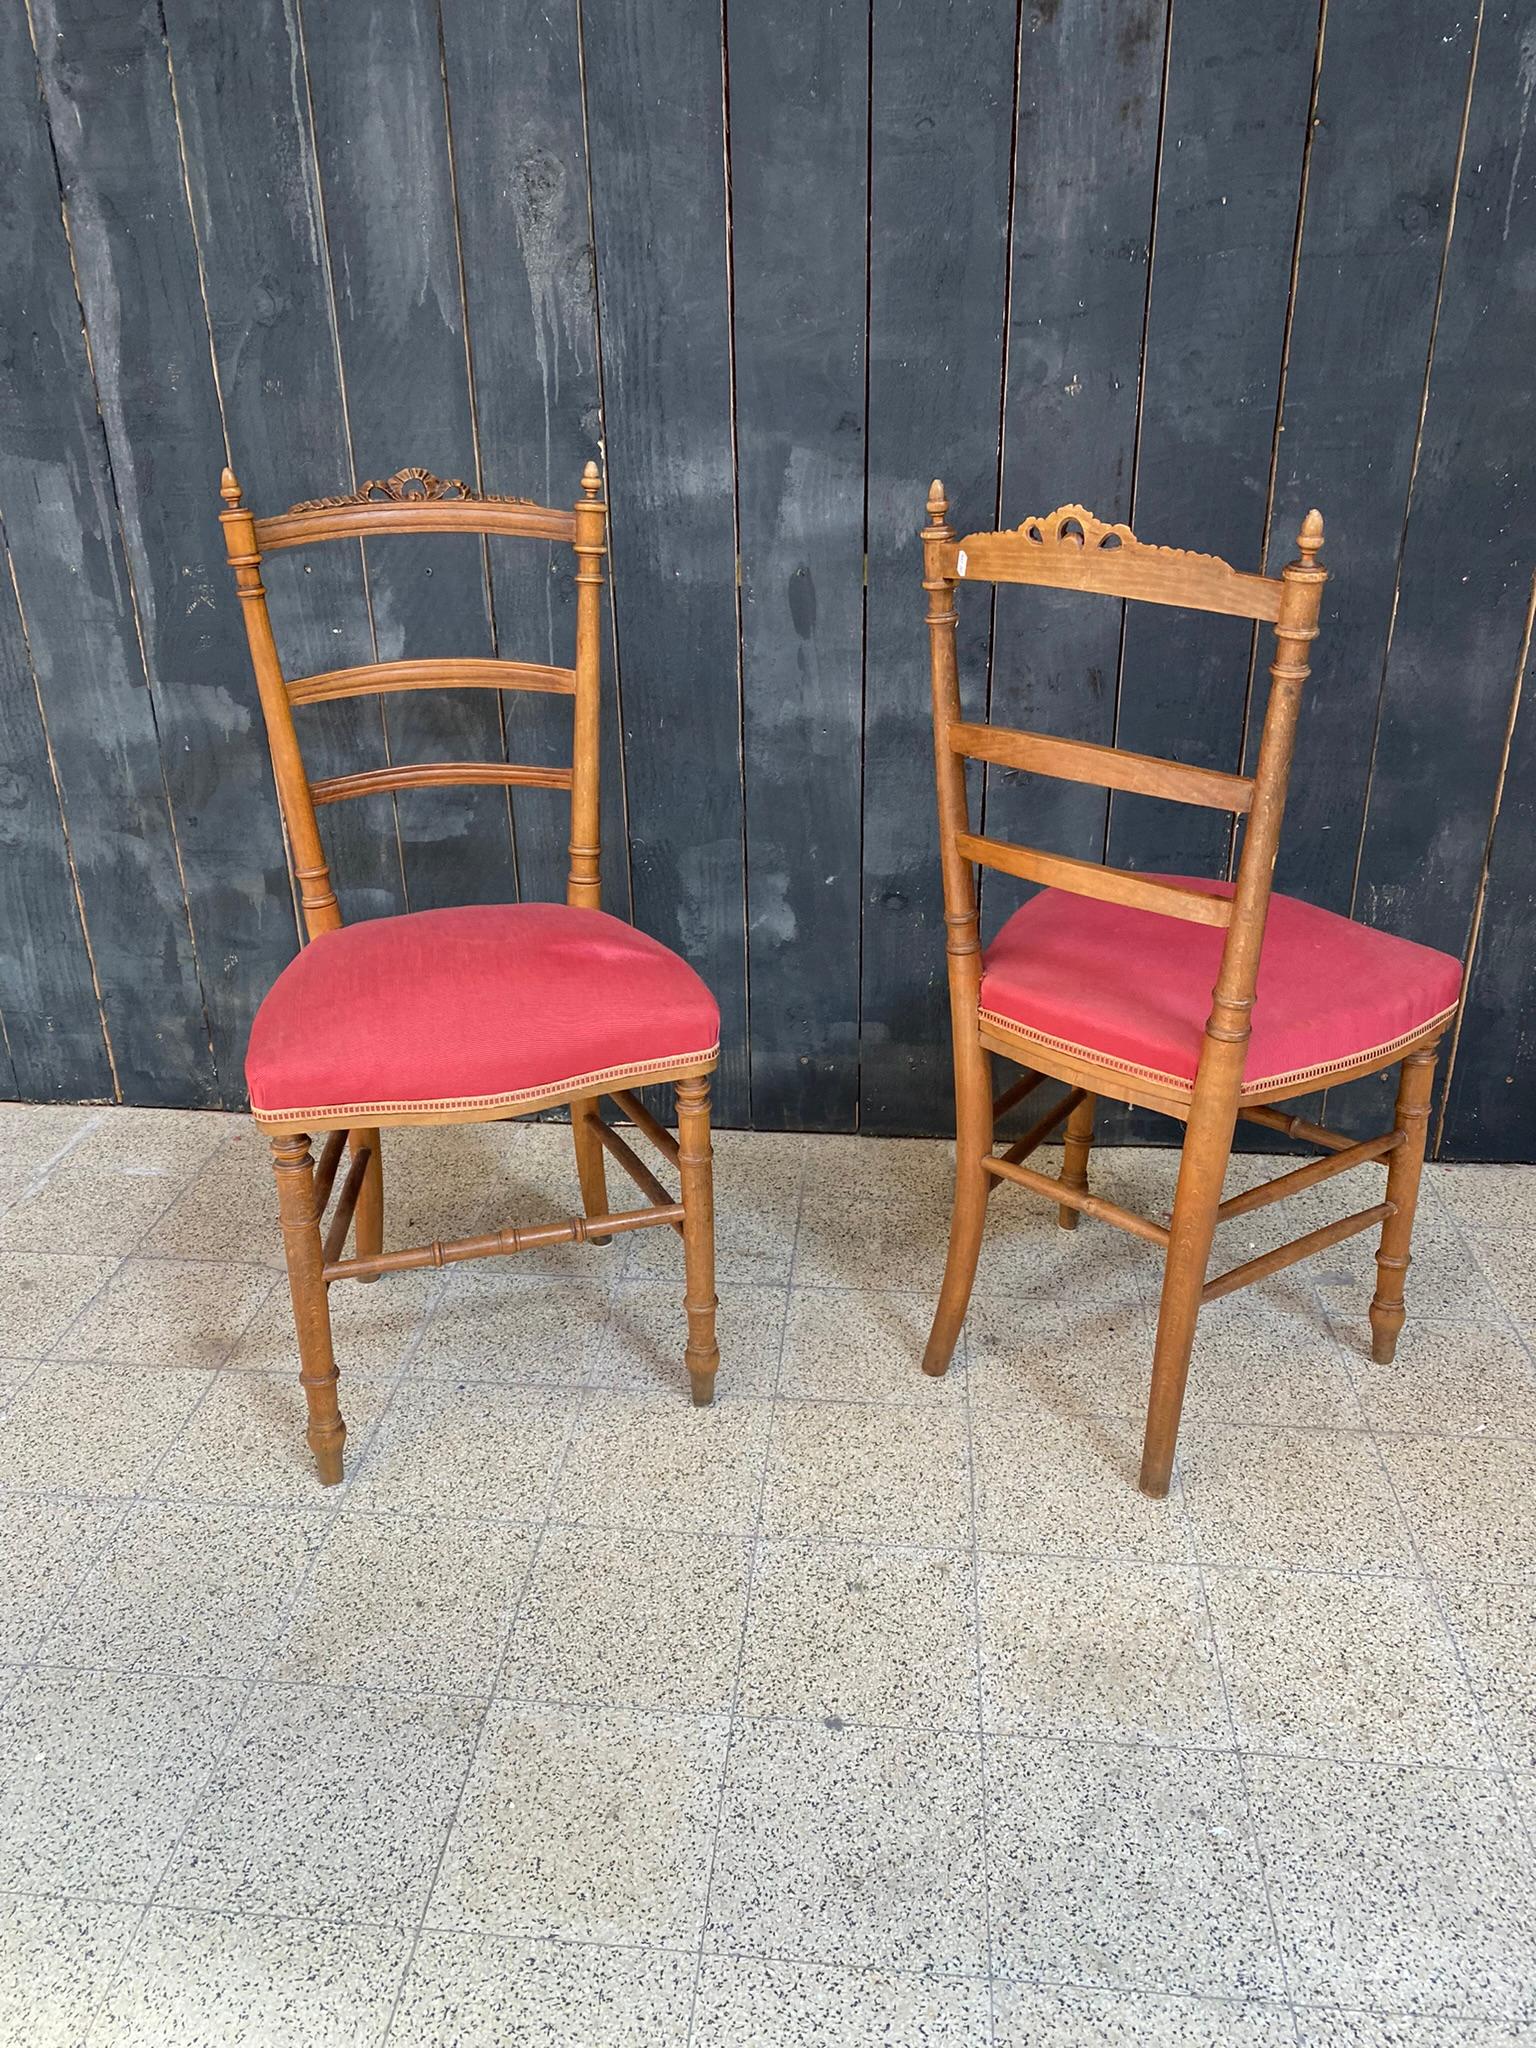 2 Original Napoleon III Chairs, France, 1850s For Sale 2